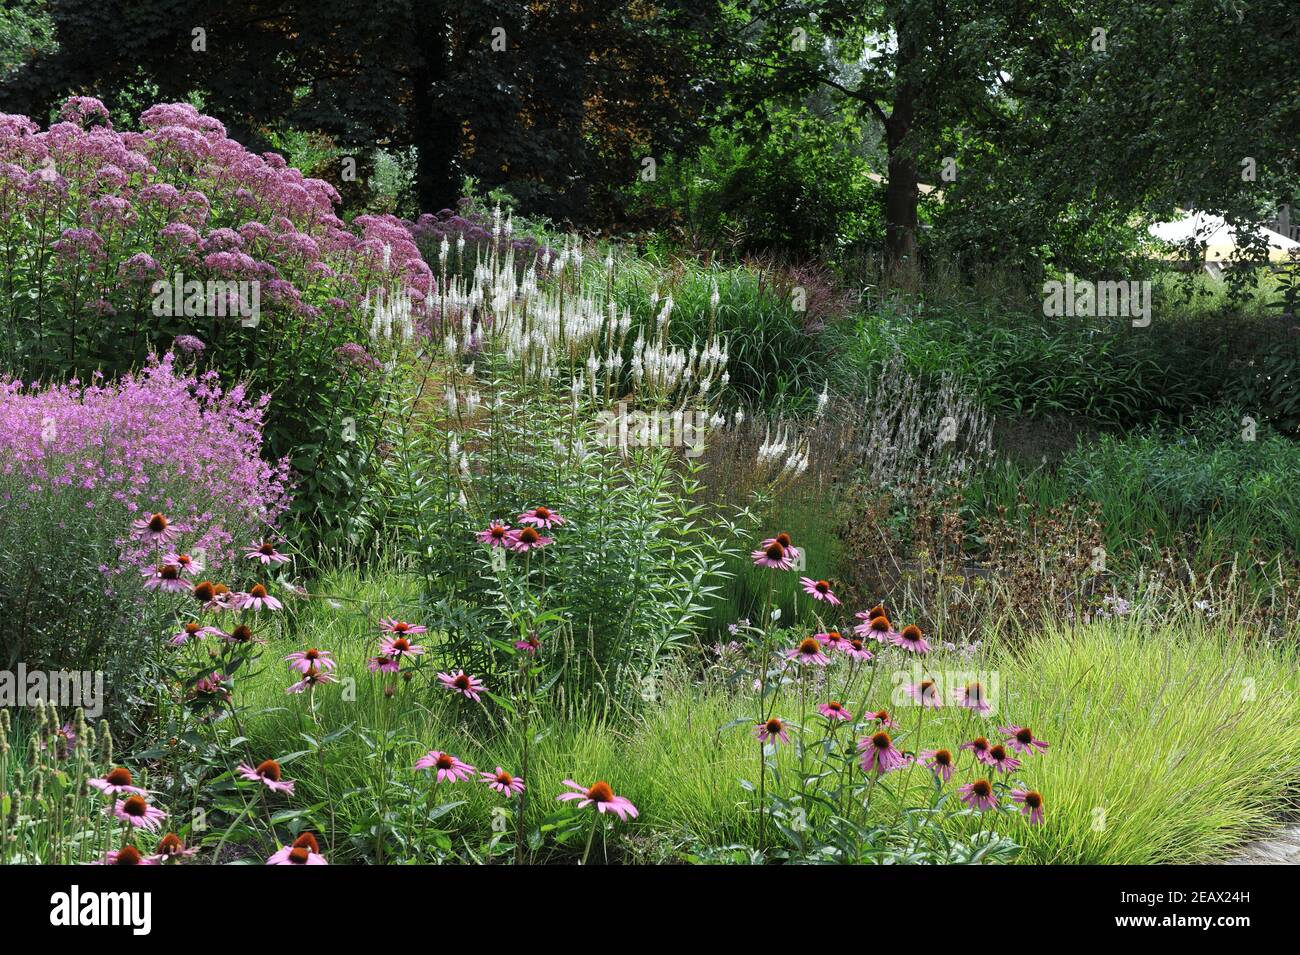 HAMM, GERMANY - 15 AUGUST 2015: Planting in perennial meadow style designed by Piet Oudolf in the Nature Designs garden in the Maximilianpark Stock Photo